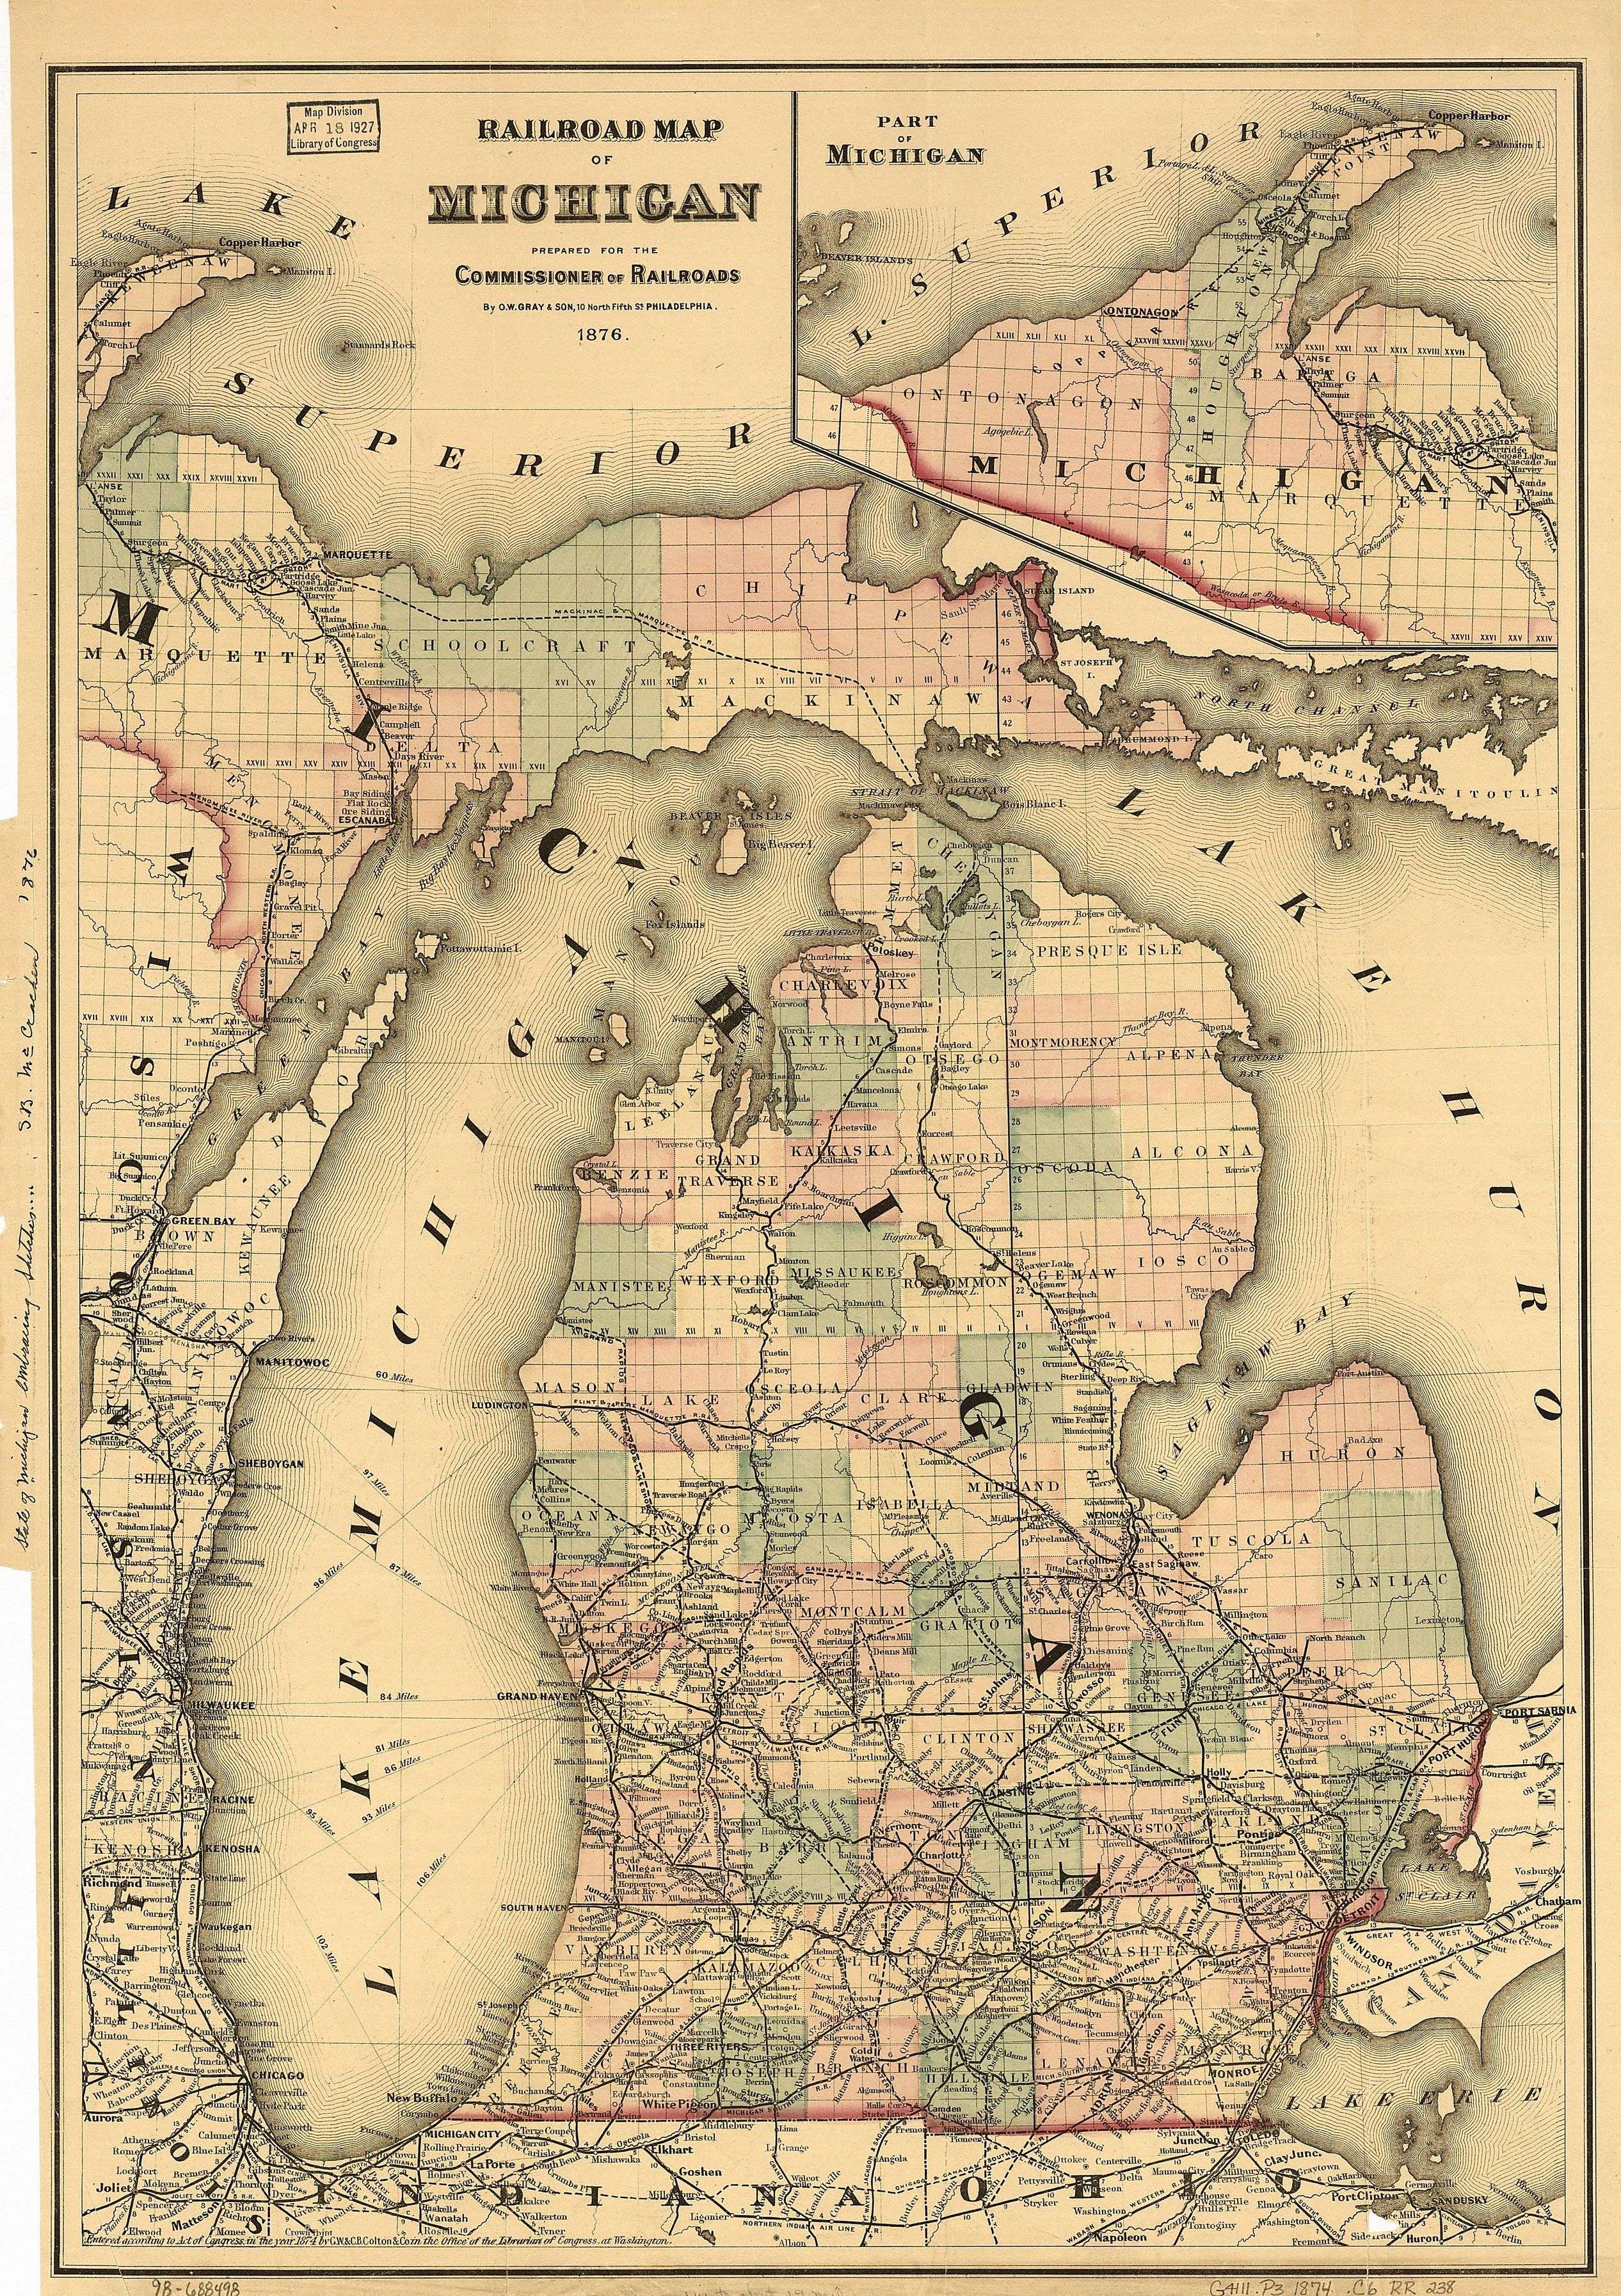 Starting in the 1870s, railroads connected Northern Michigan to lower cities.